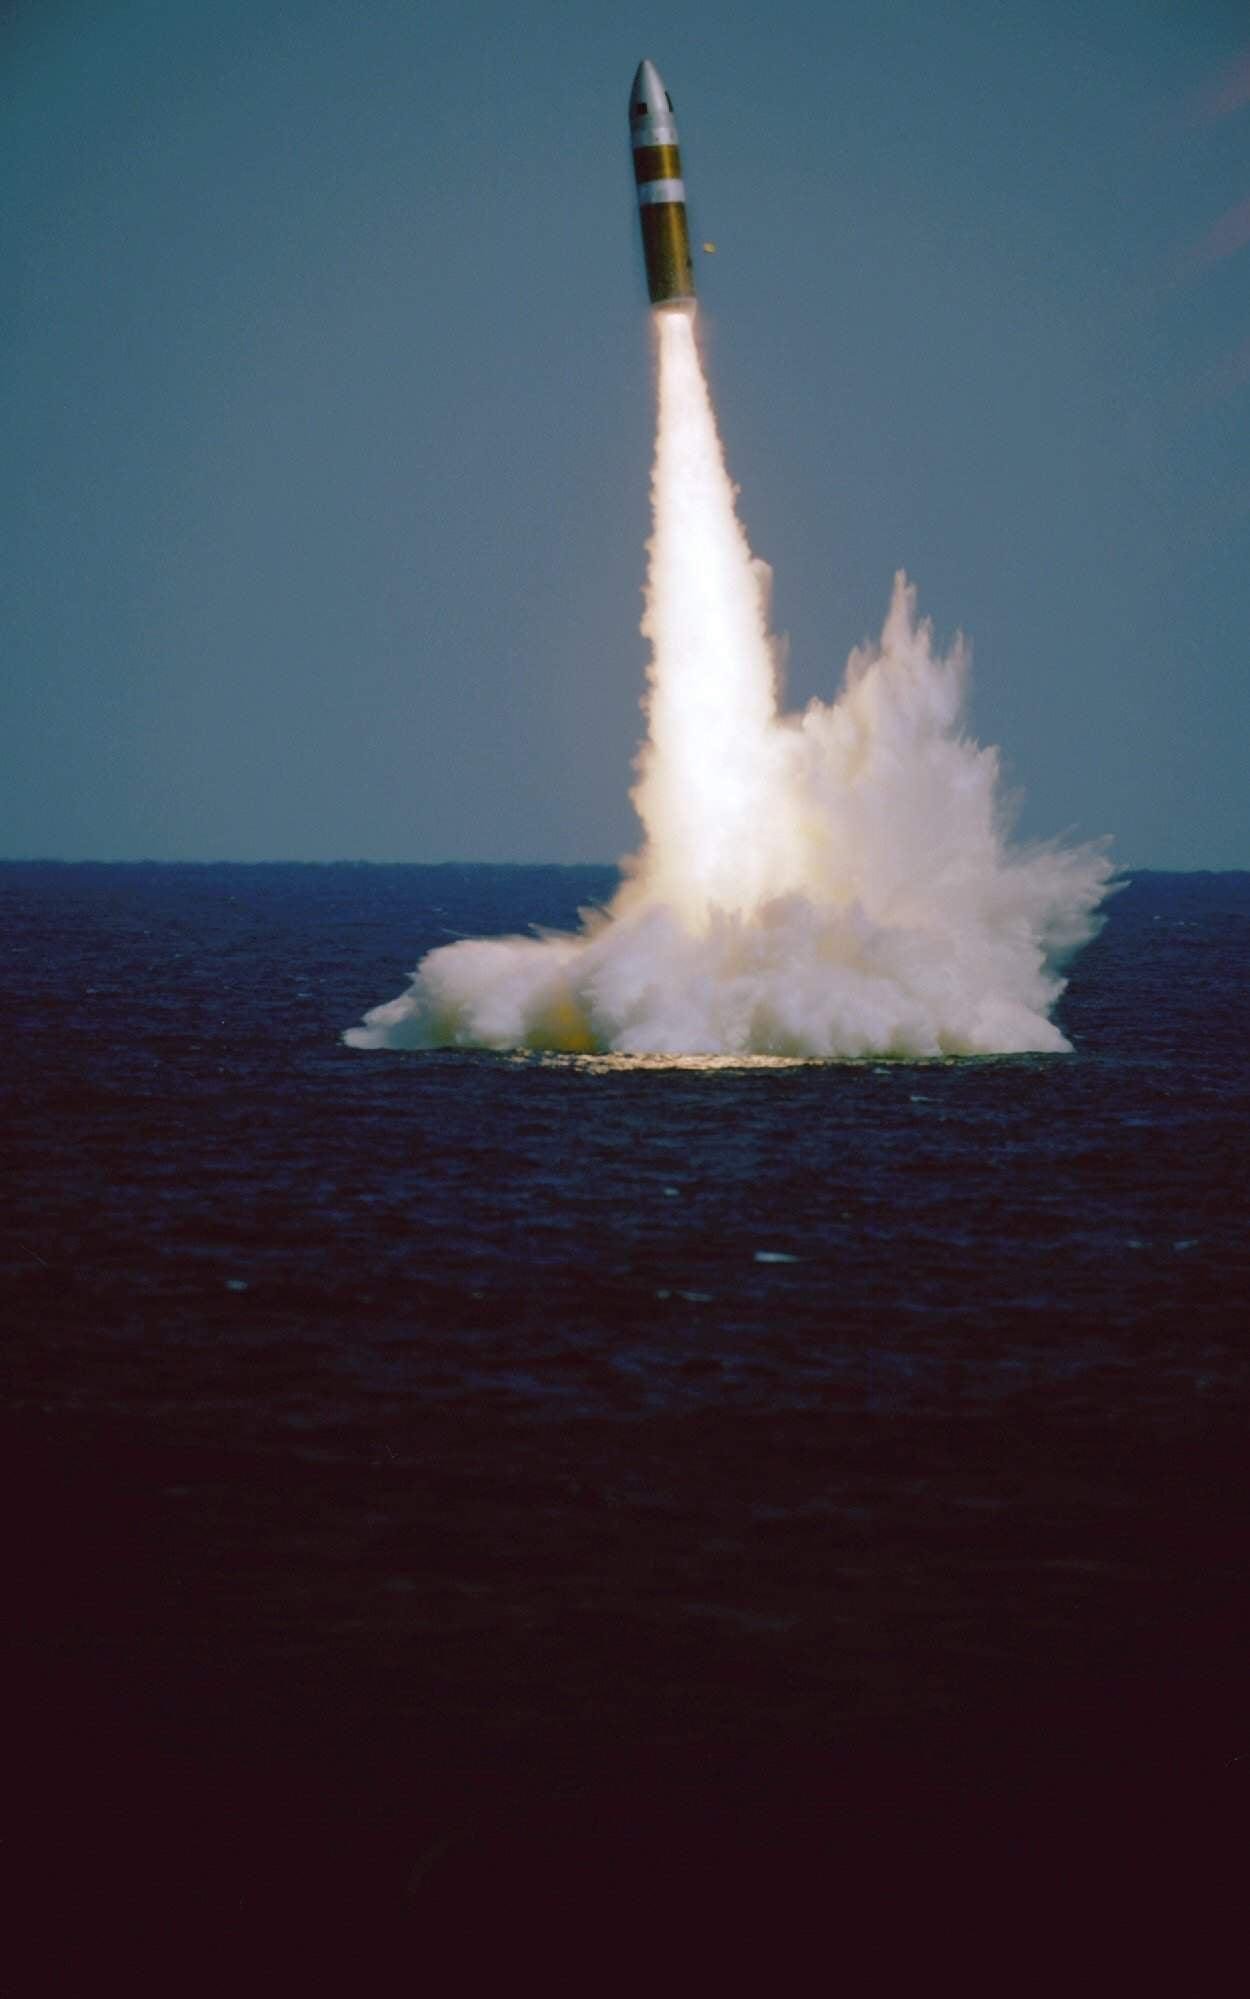  Missle launch testing from the USS Daniel Boone to check telemetry and accuracy. They shot/tested 4 missiles (without warheads) off the coast of Africa toward Cape Canaveral, FL. Once the hatch is open, steam explosions in the tube push the 30-foot 